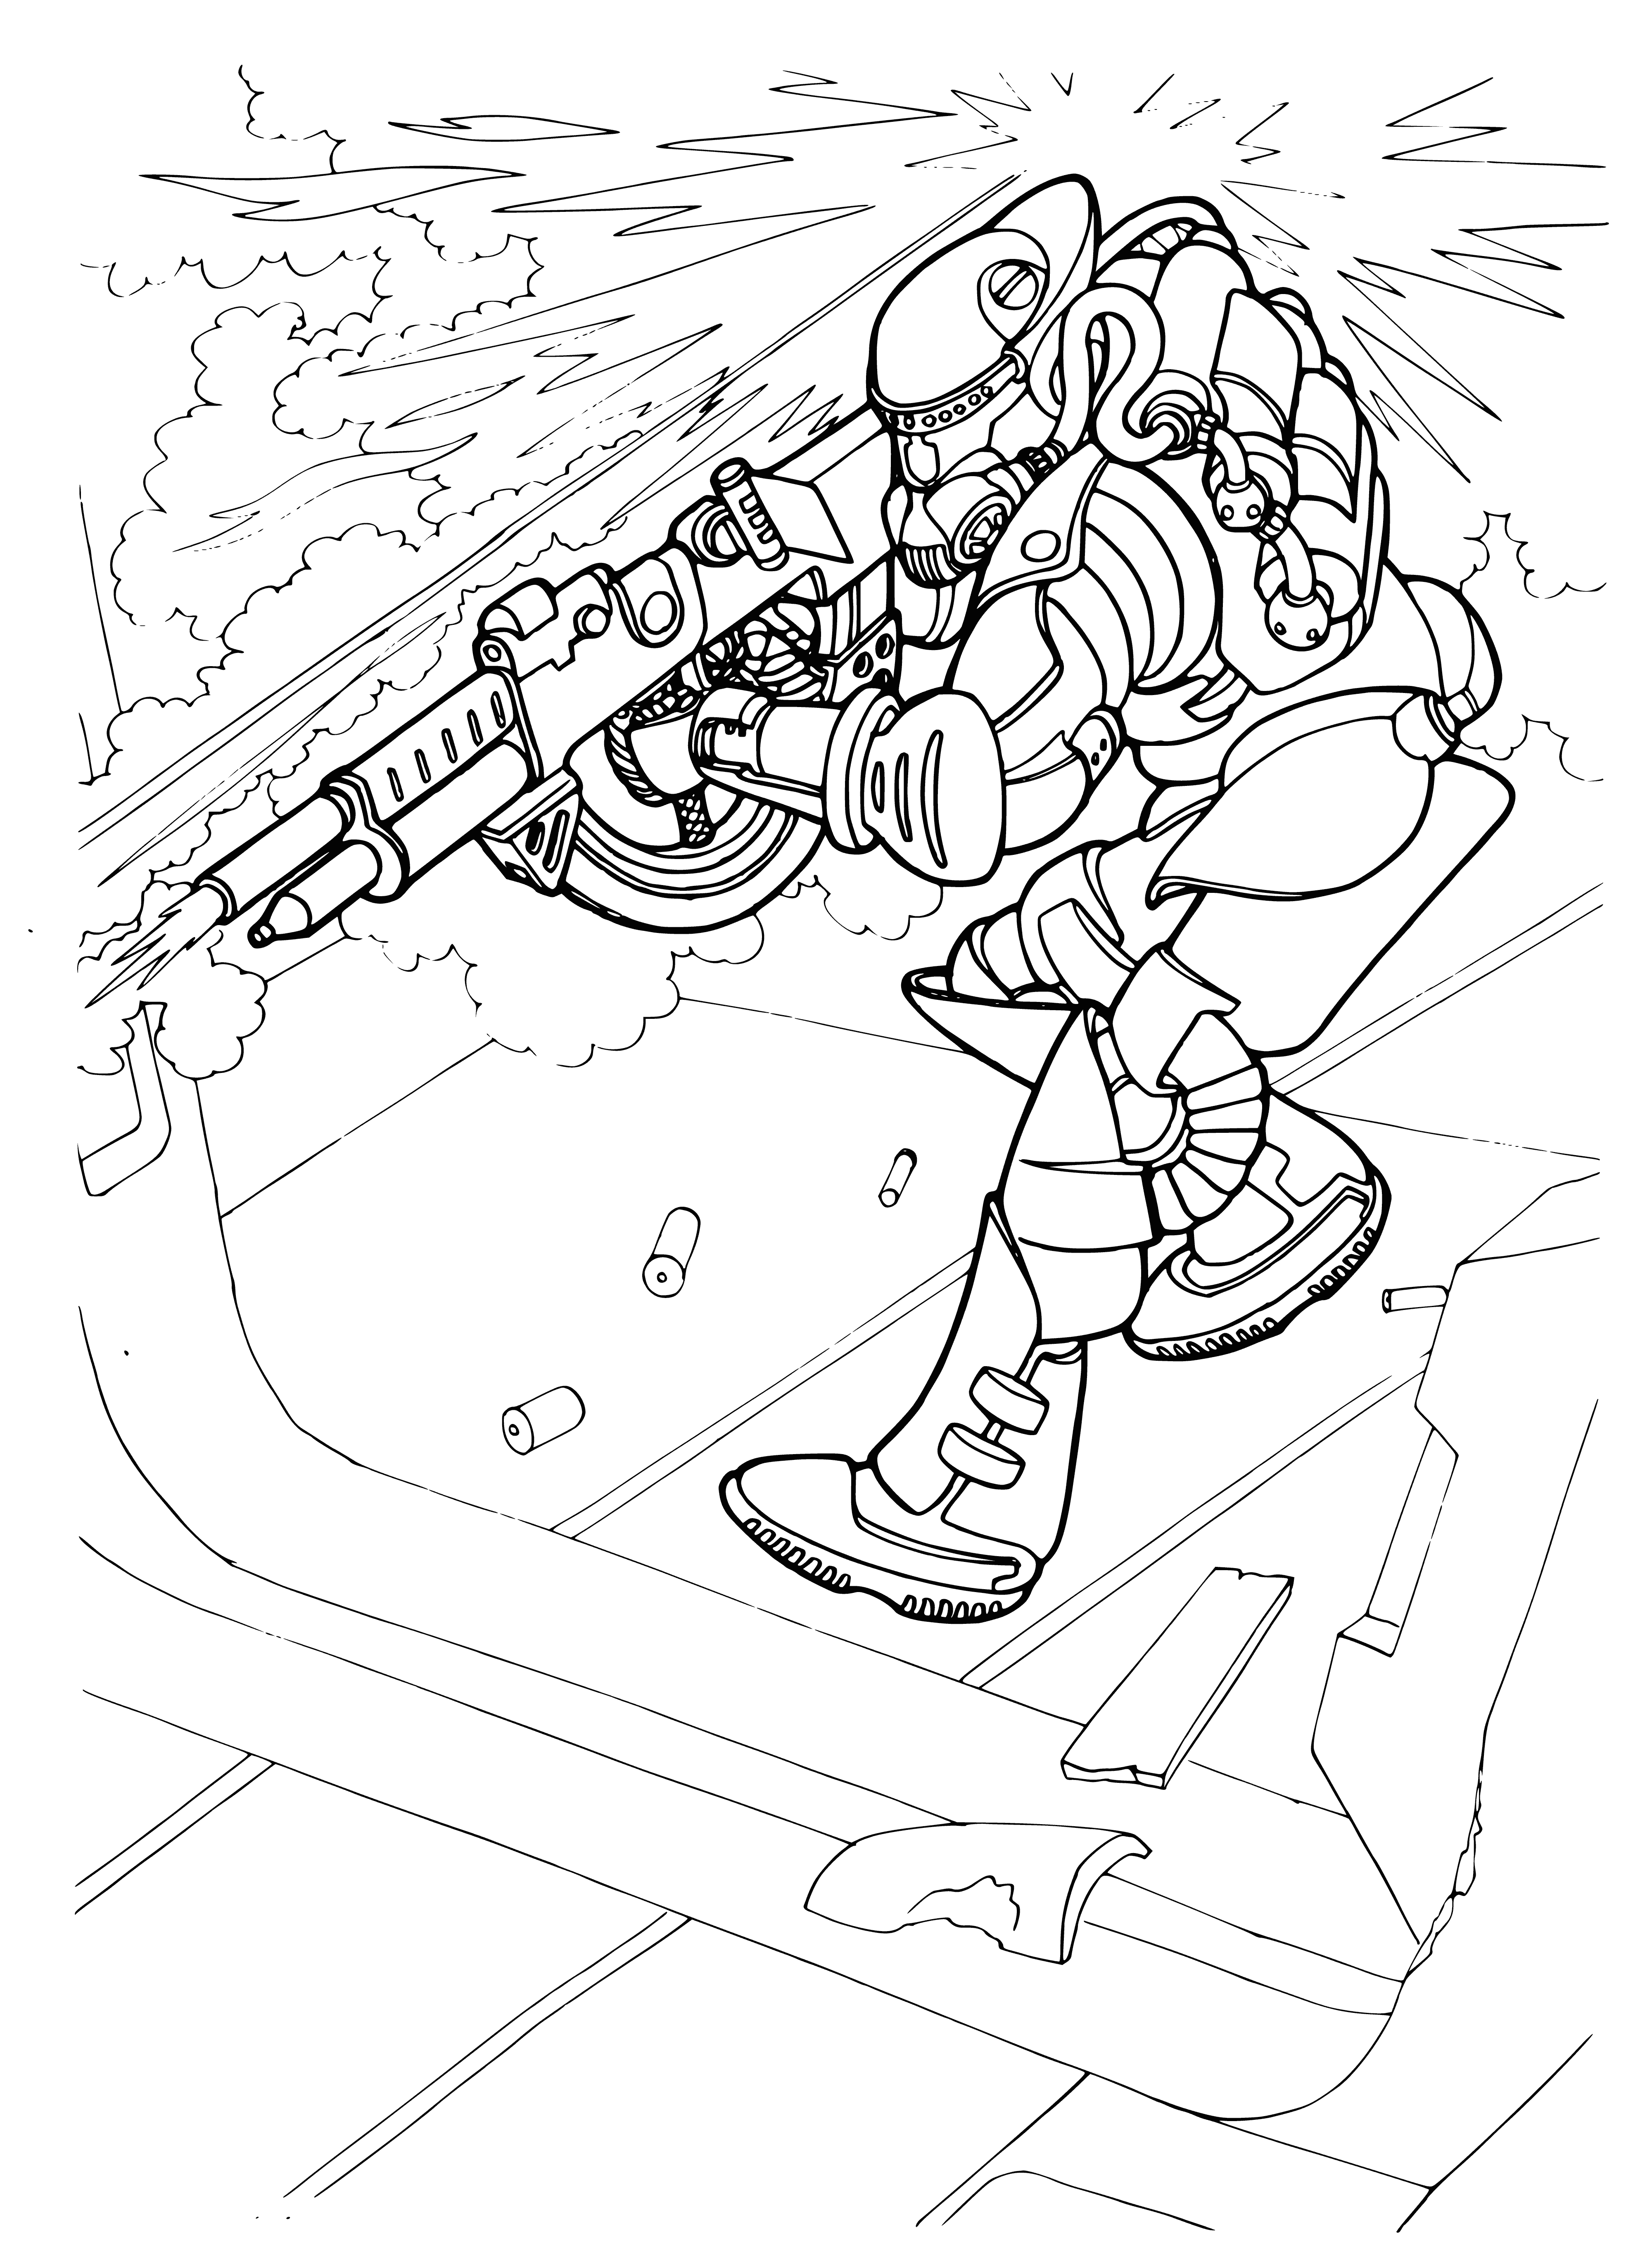 coloring page: Future wars fought by robots wearing metal armor & helmets, armed with powerful guns shooting bullets at high speeds.